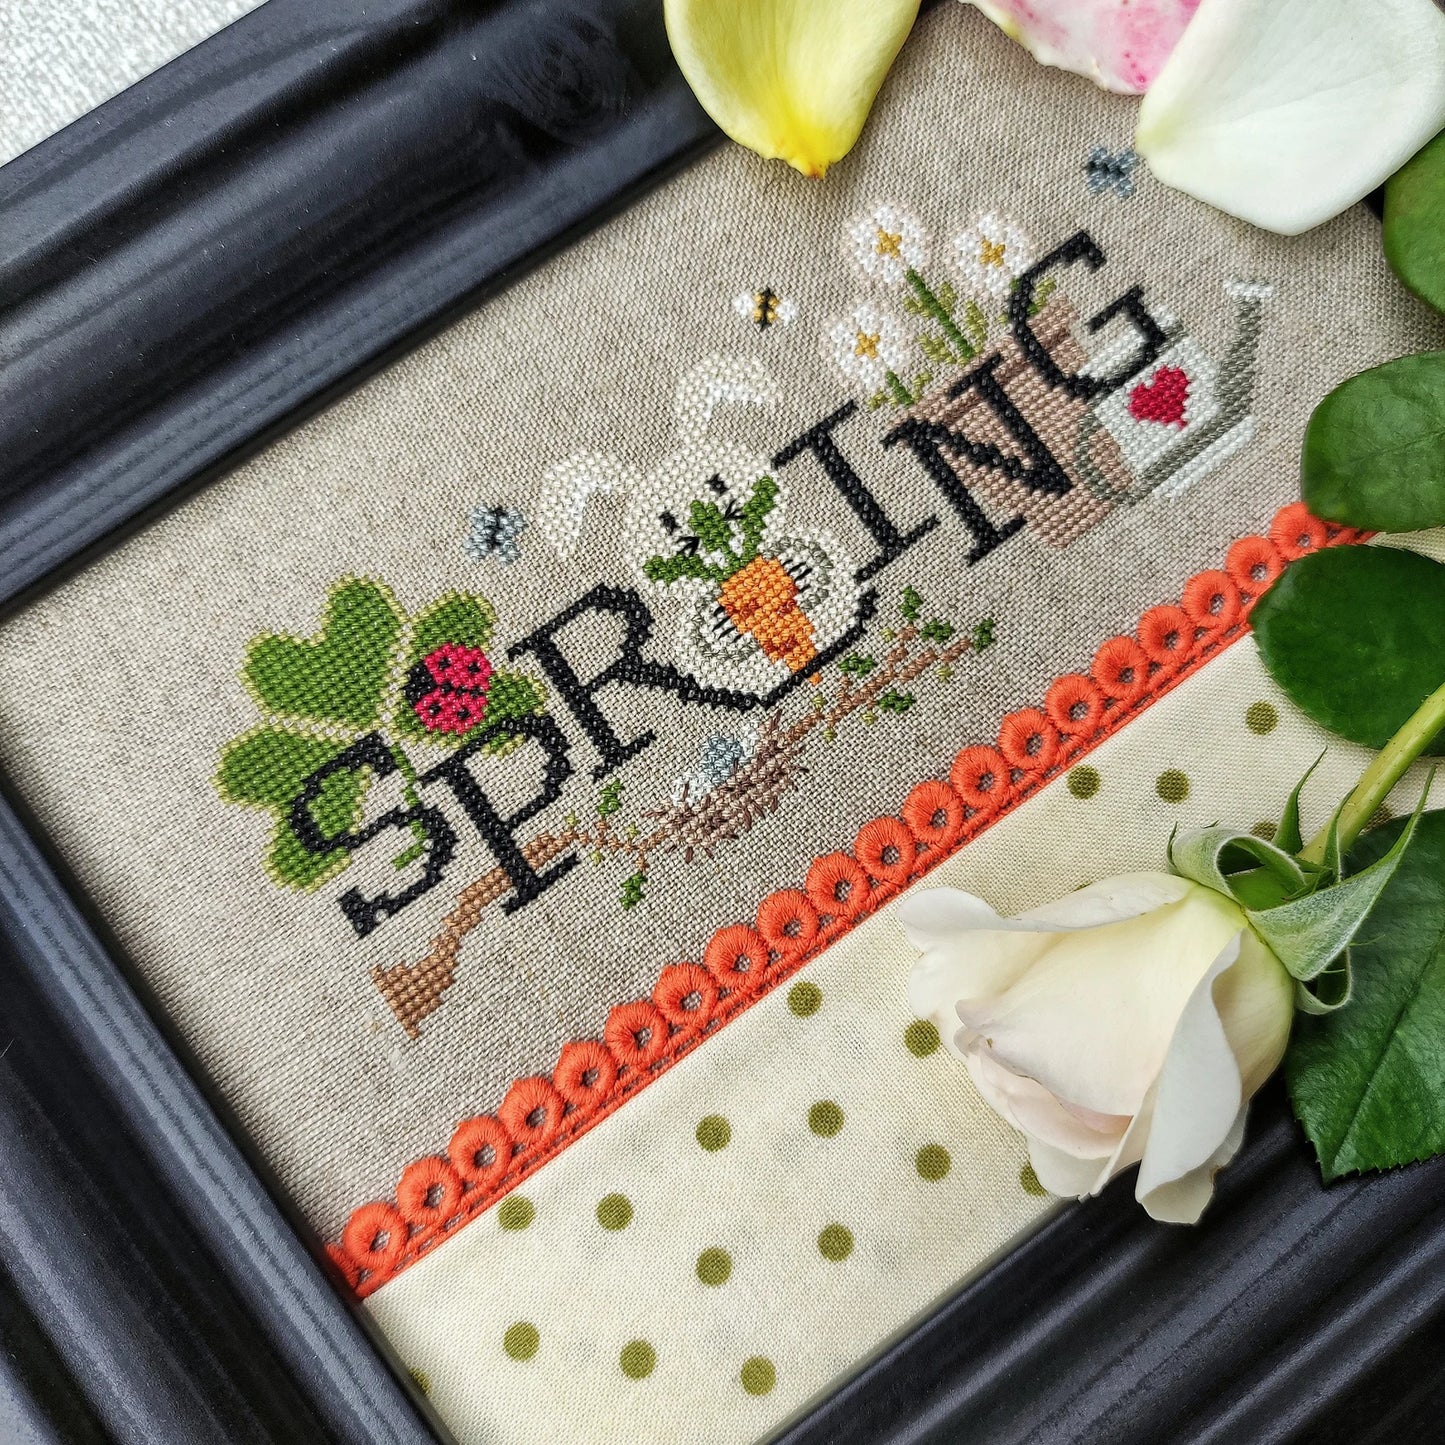 When I think of Spring Cross Stitch Pattern by Puntini Puntini